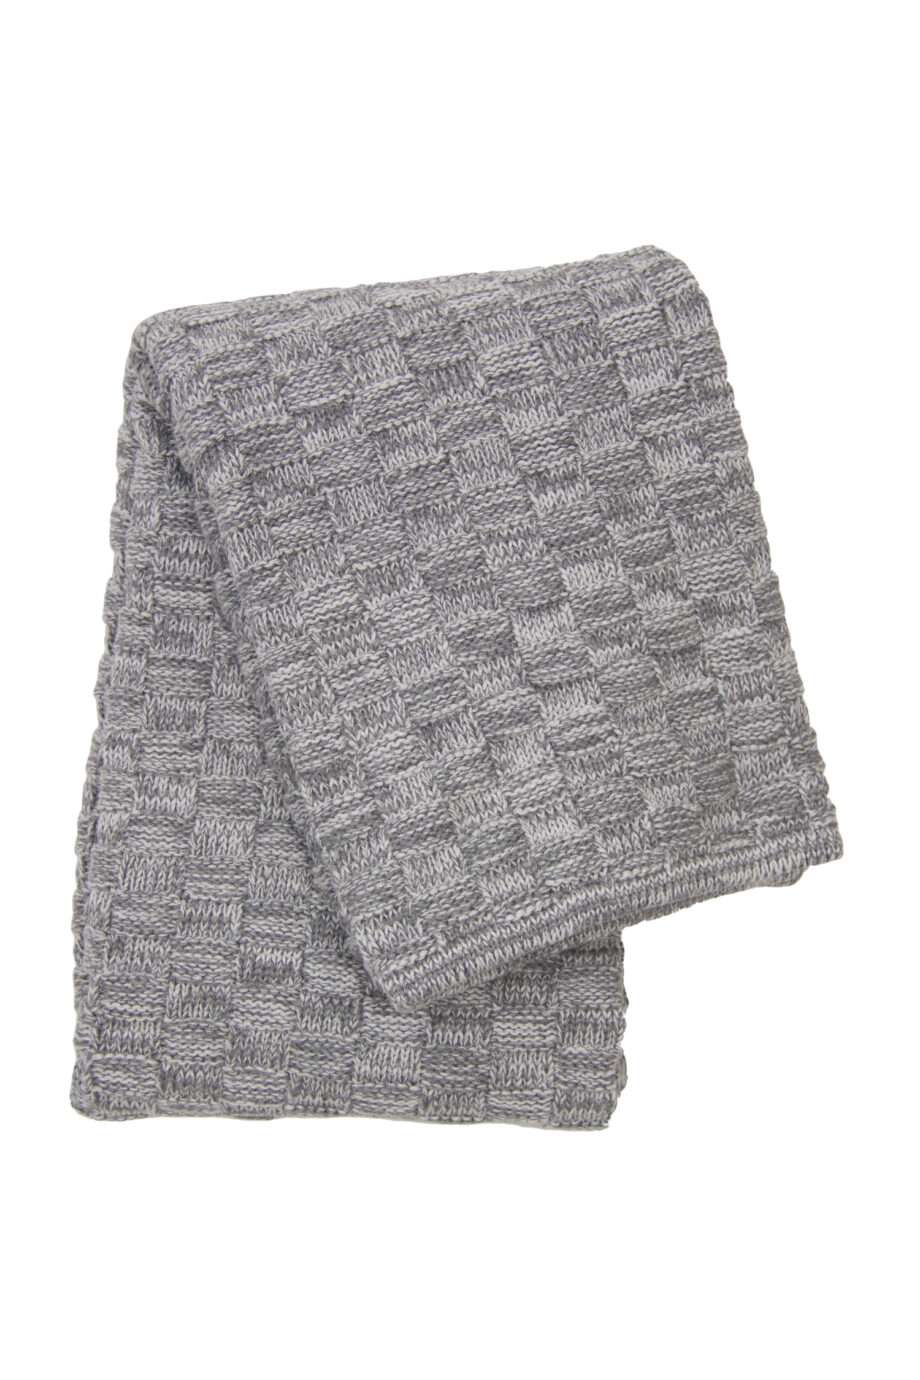 drops mêlée grey knitted cotton little blanket small